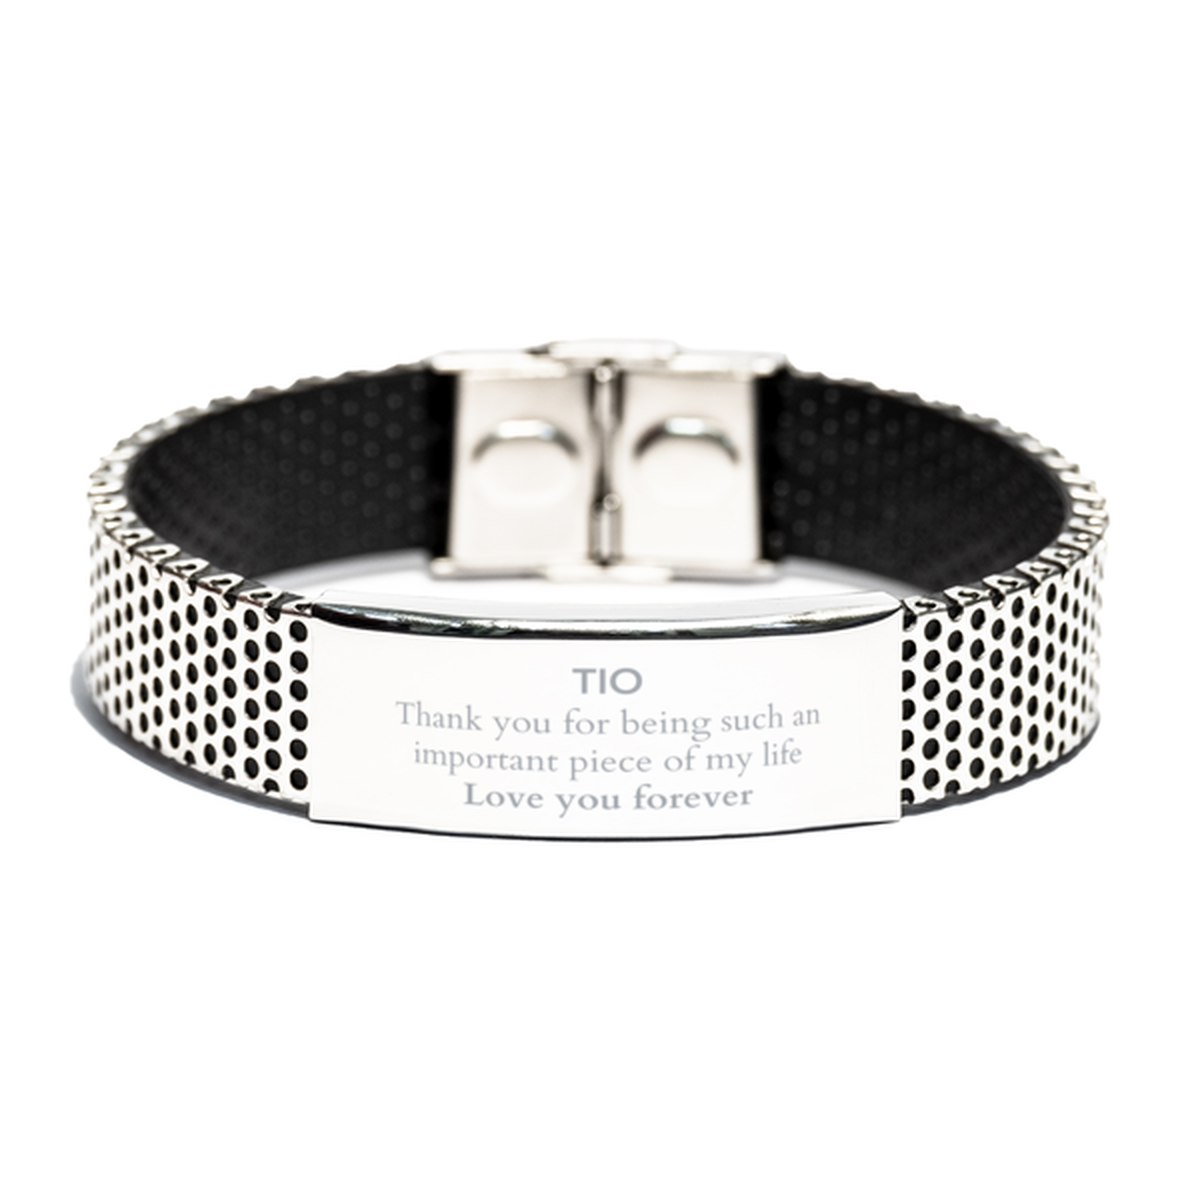 Appropriate Tio Stainless Steel Bracelet Epic Birthday Gifts for Tio Thank you for being such an important piece of my life Tio Christmas Mothers Fathers Day